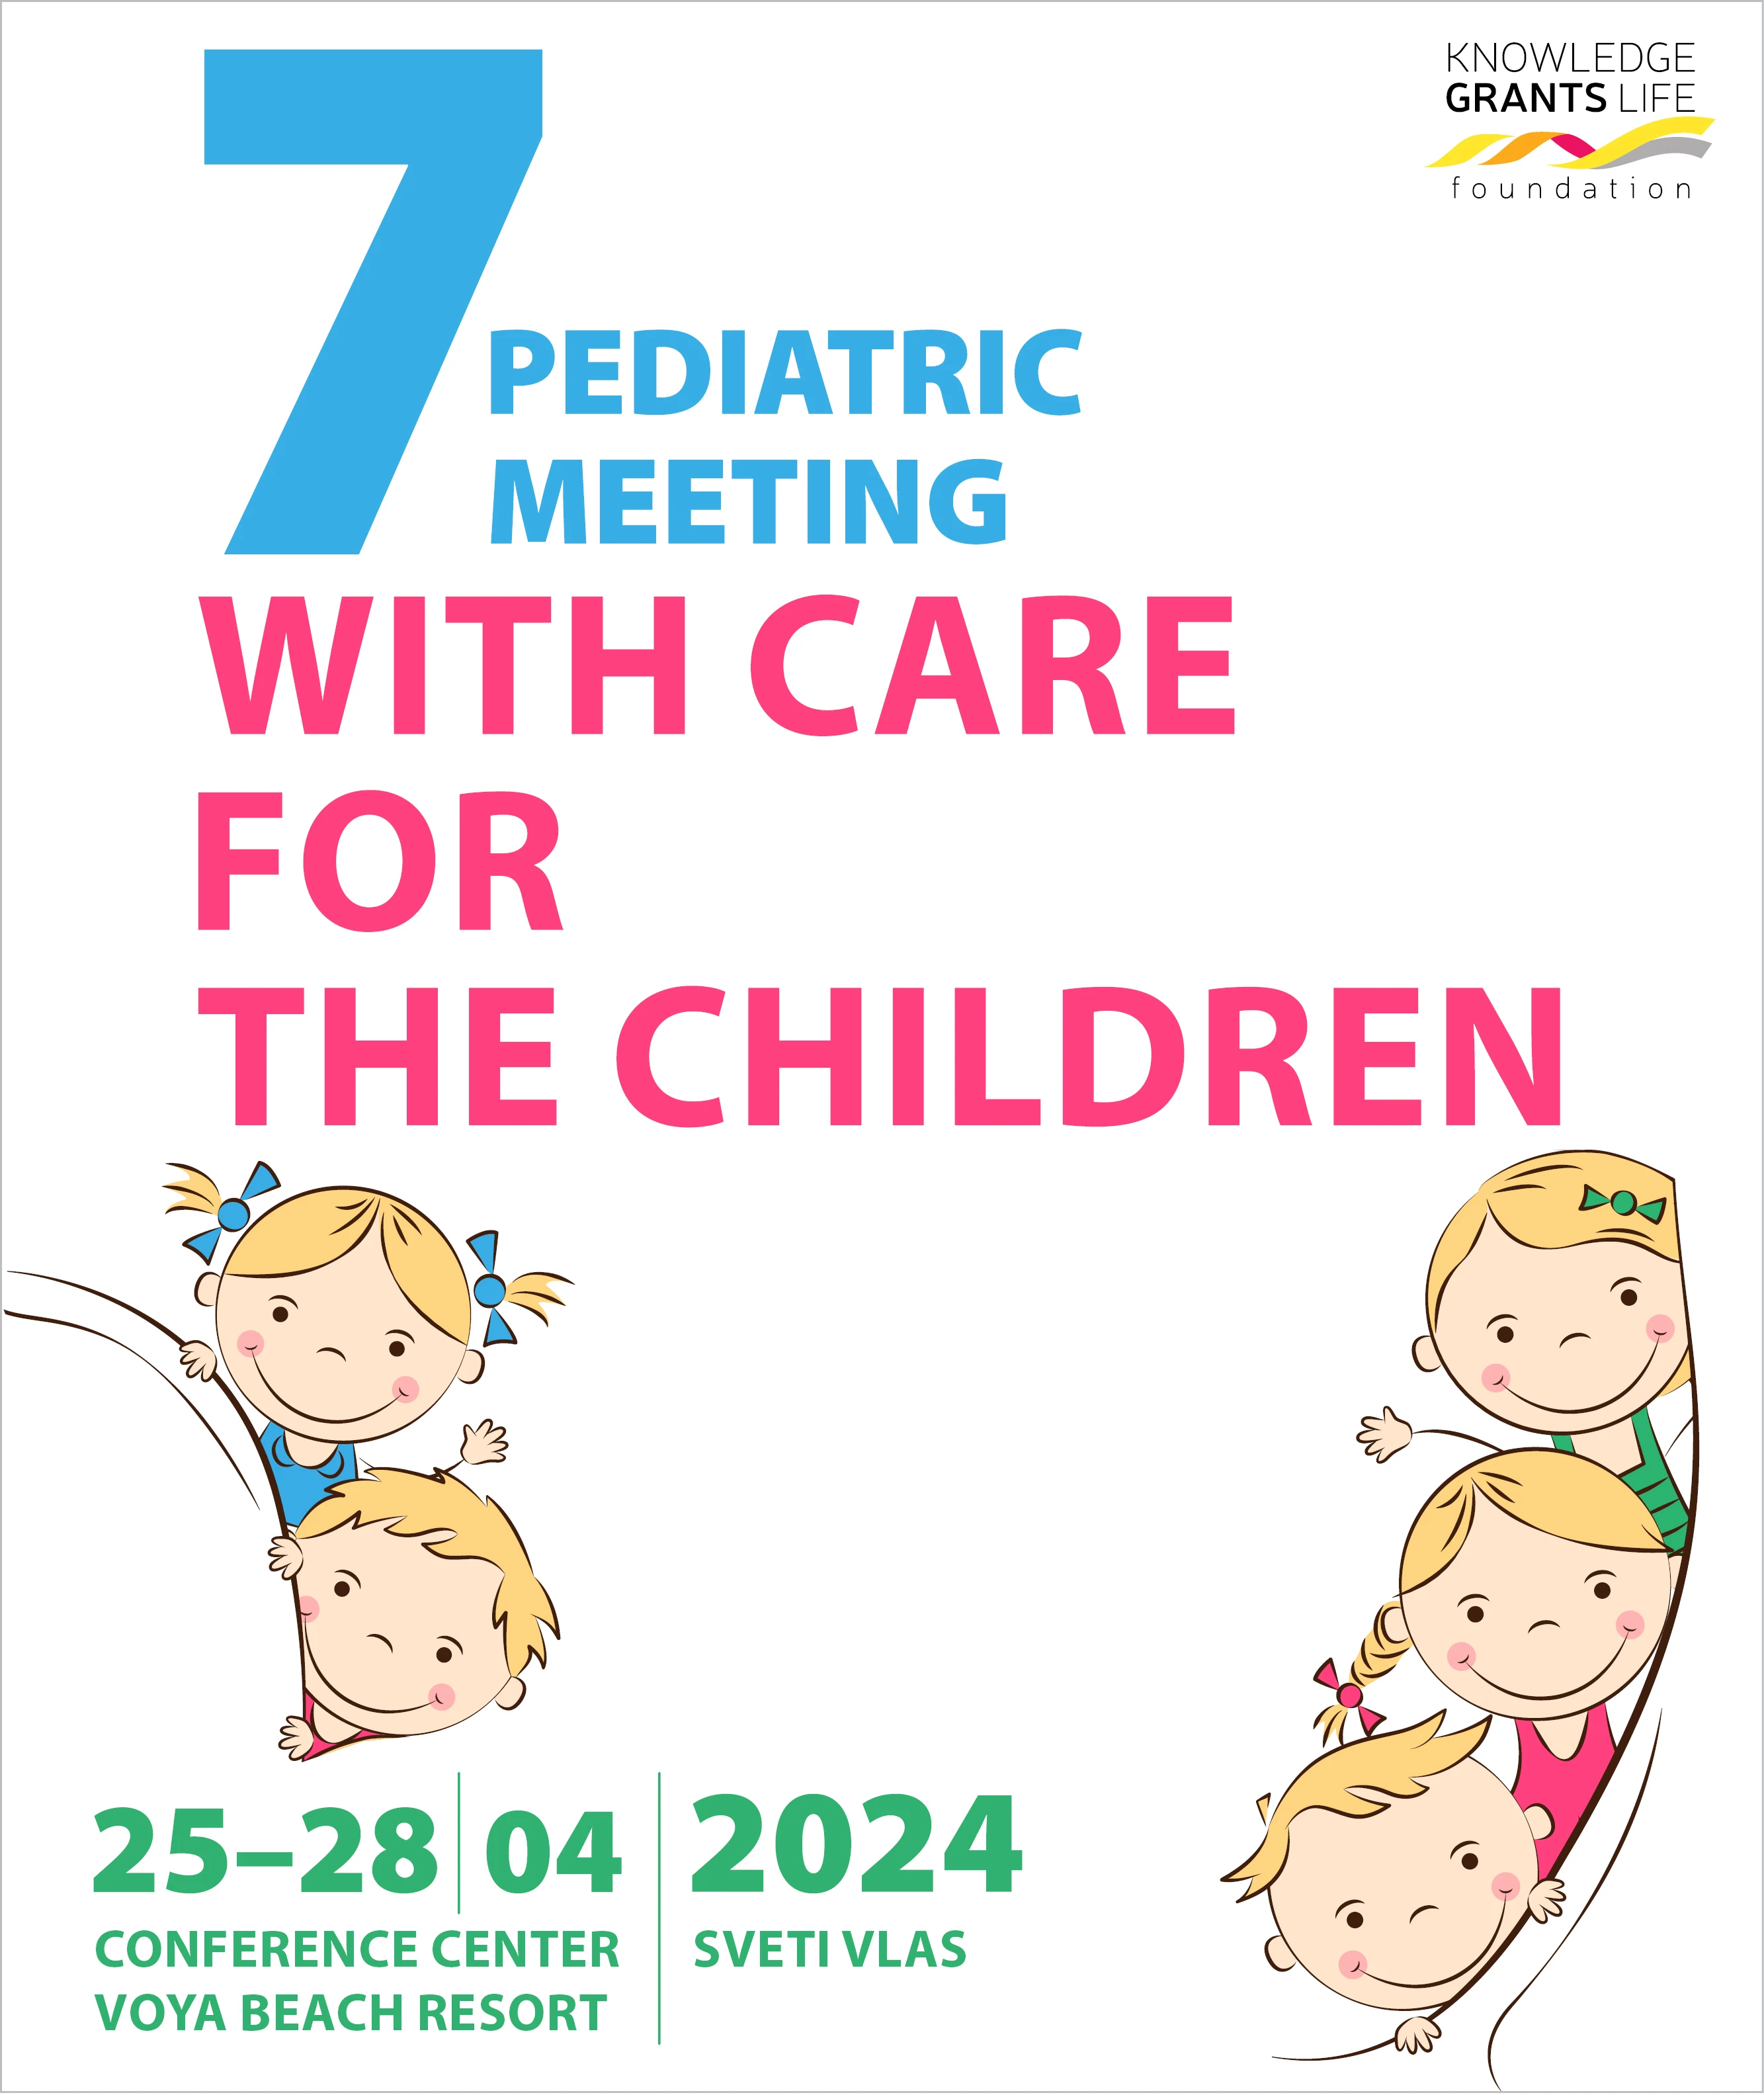 Seventh pediatric meeting "With care for the children"